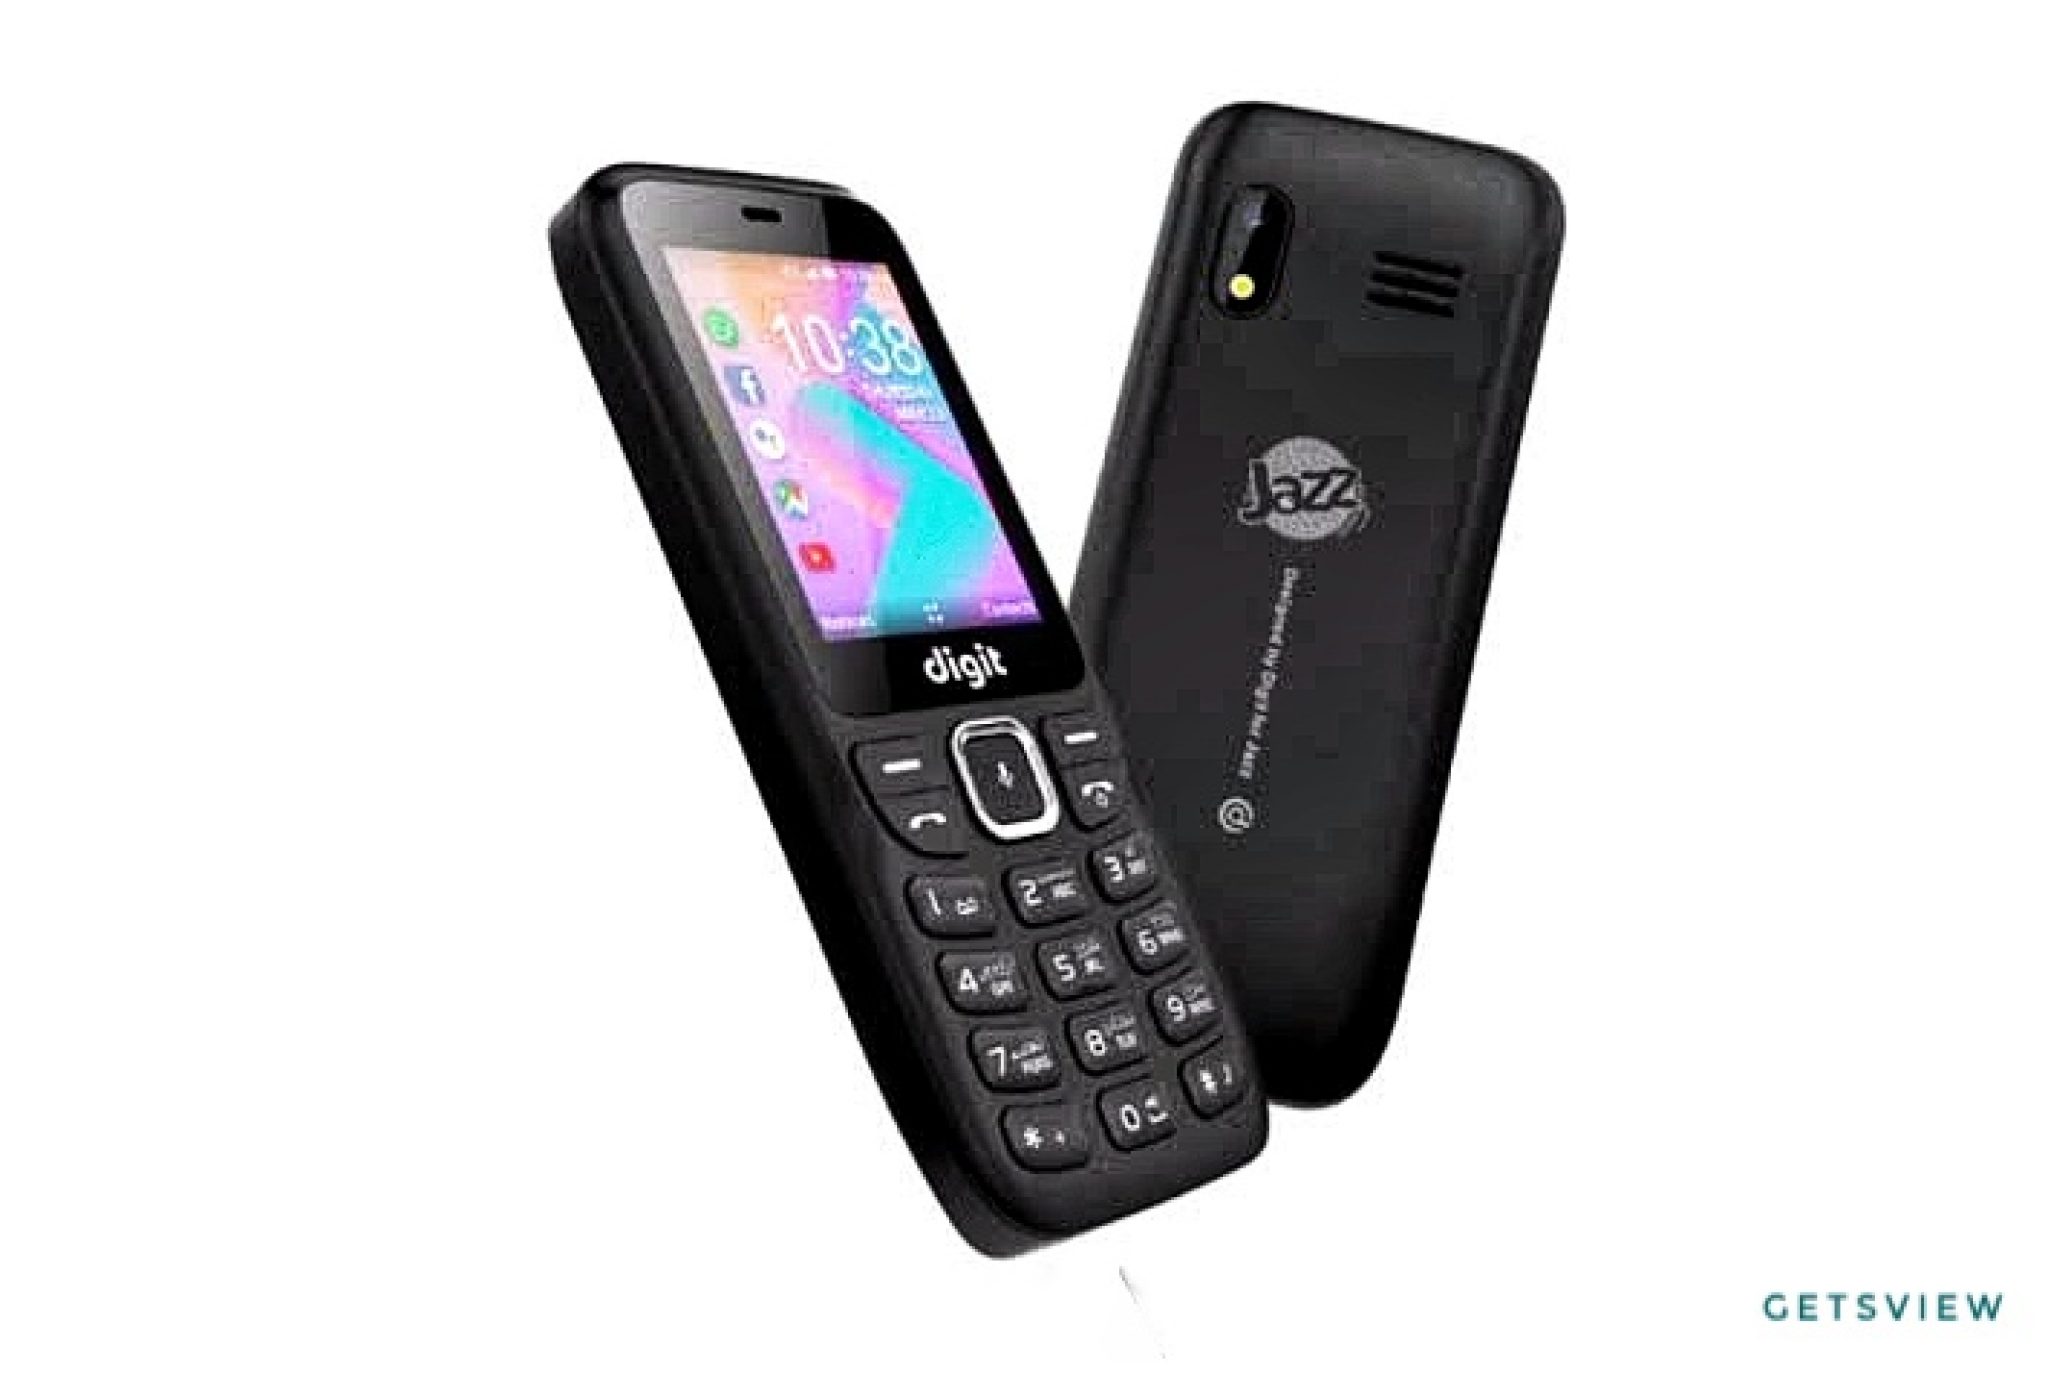 Jazz DIGIT 4G Button Phone With WiFi, Full Specs & Price - GETSVIEW